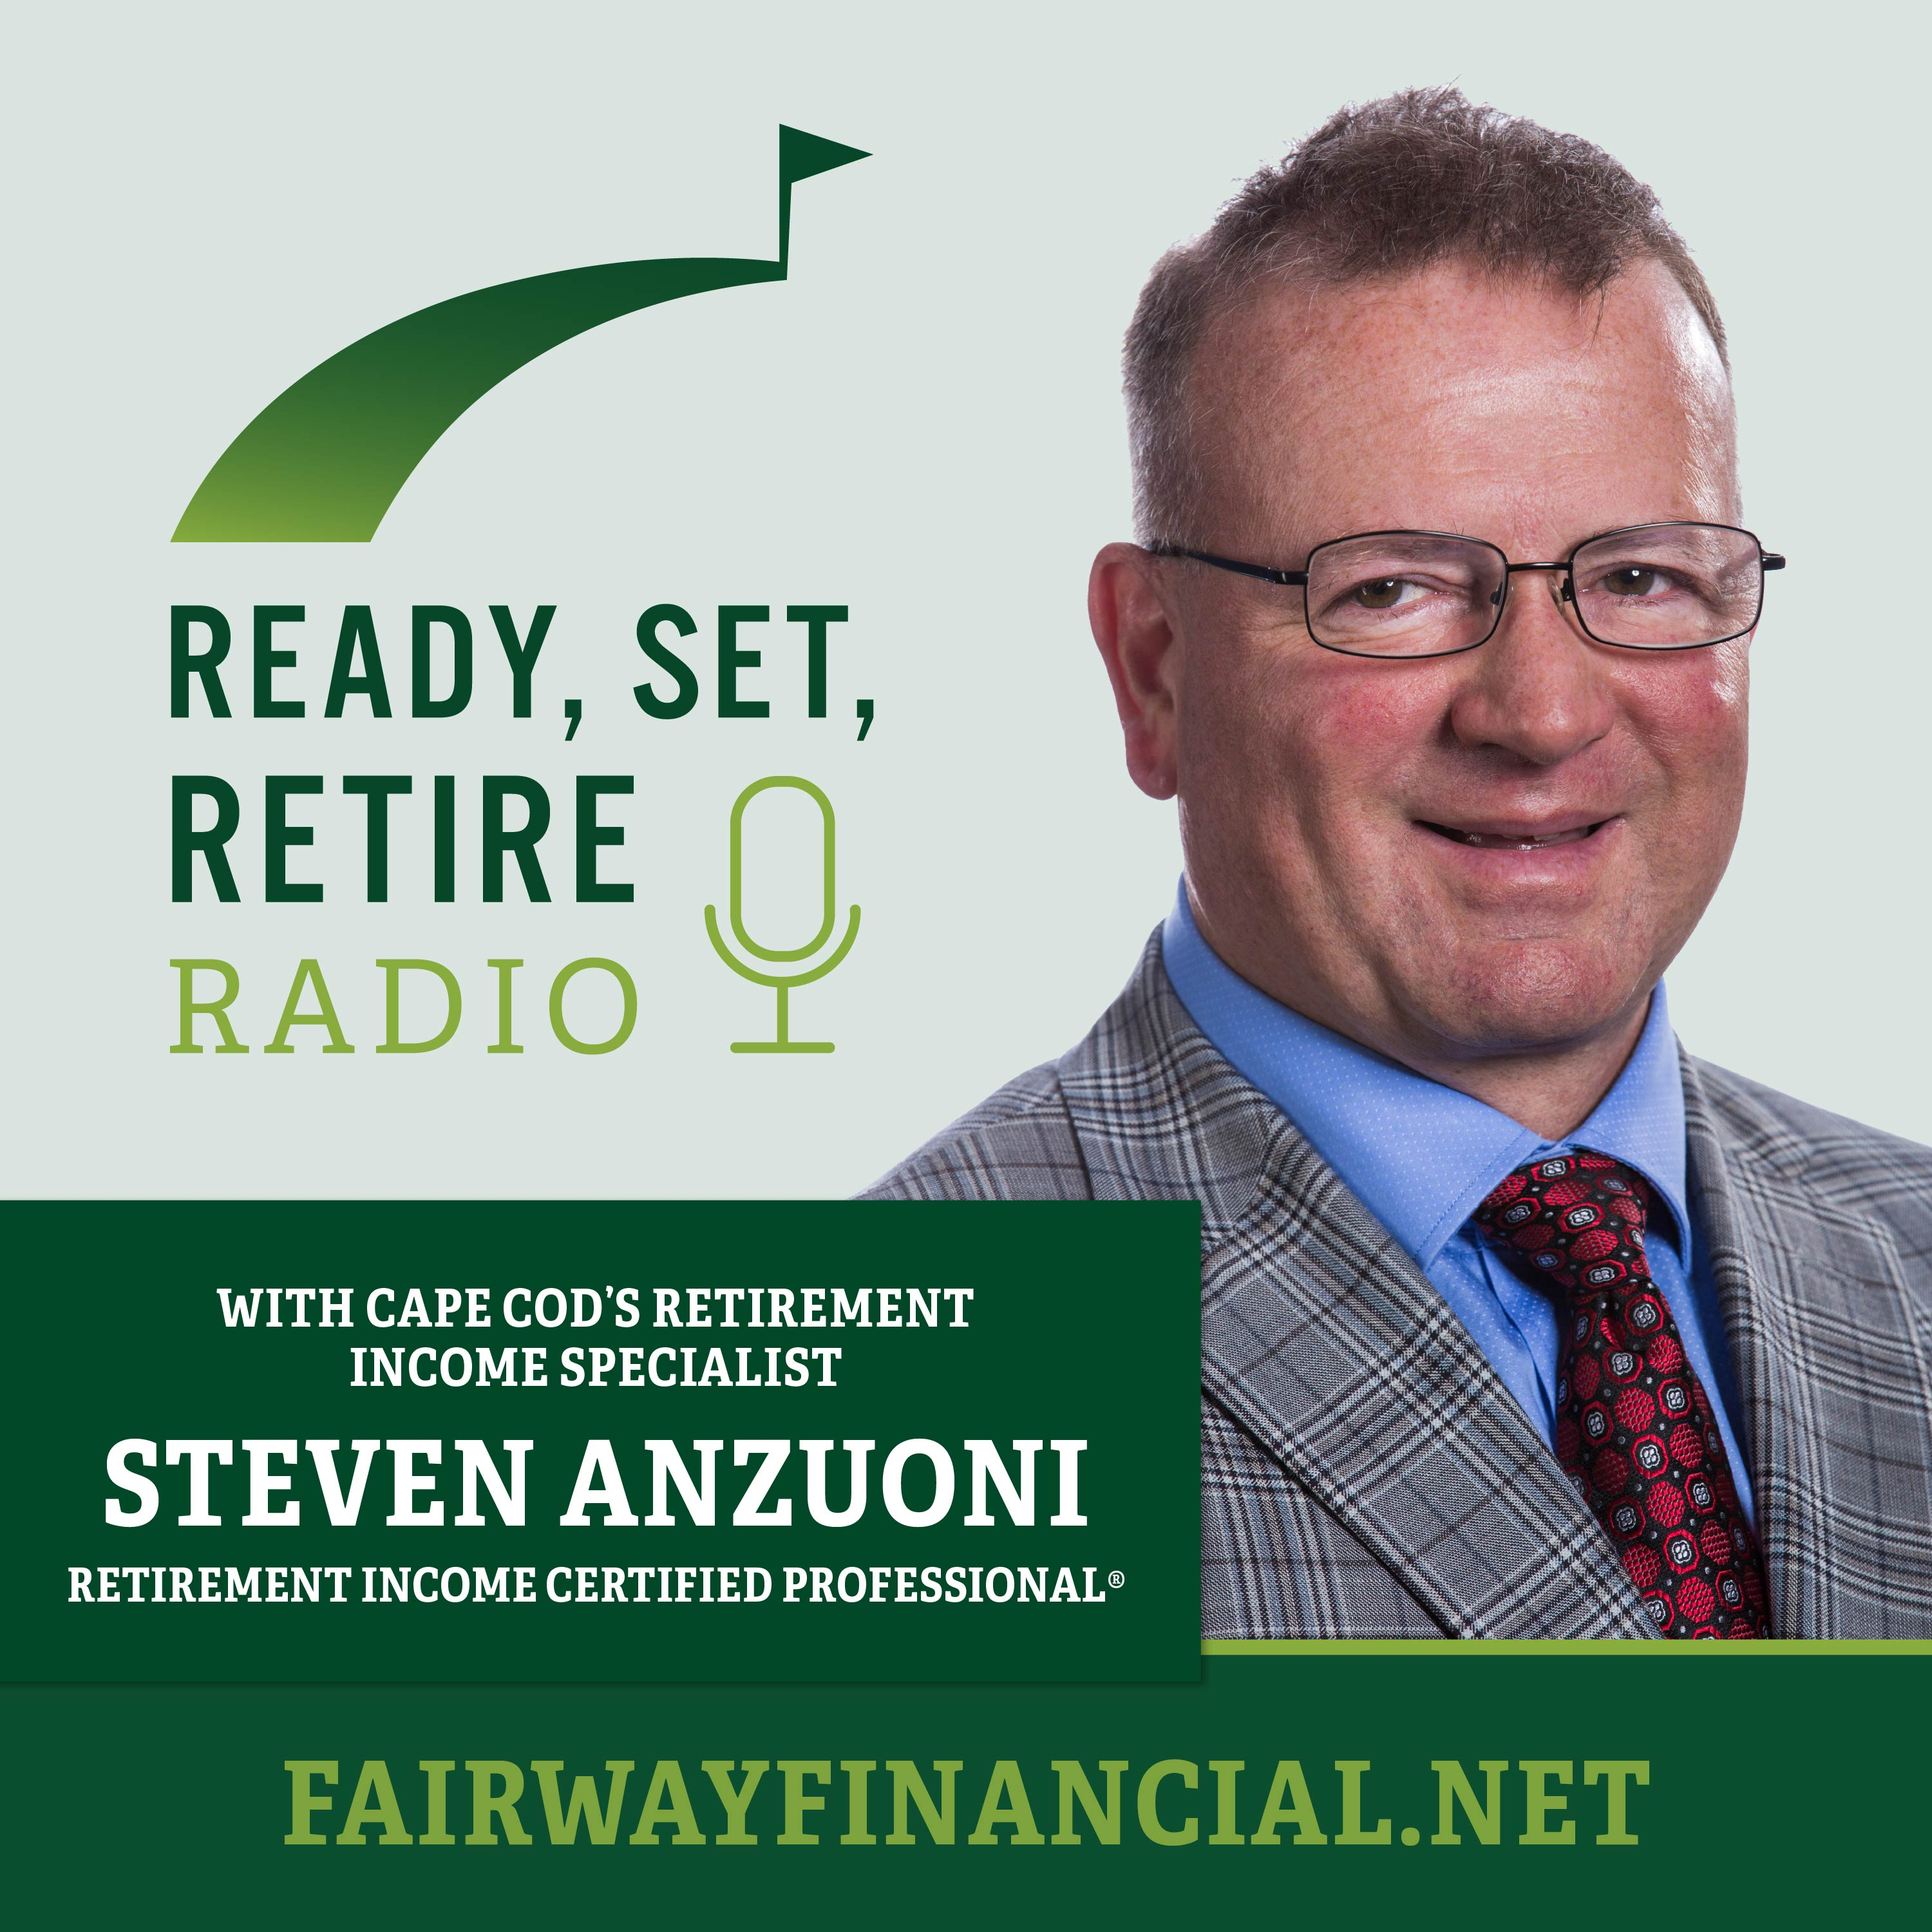 Secure 2.0 Act: The Changing Landscape of Retirement Planning